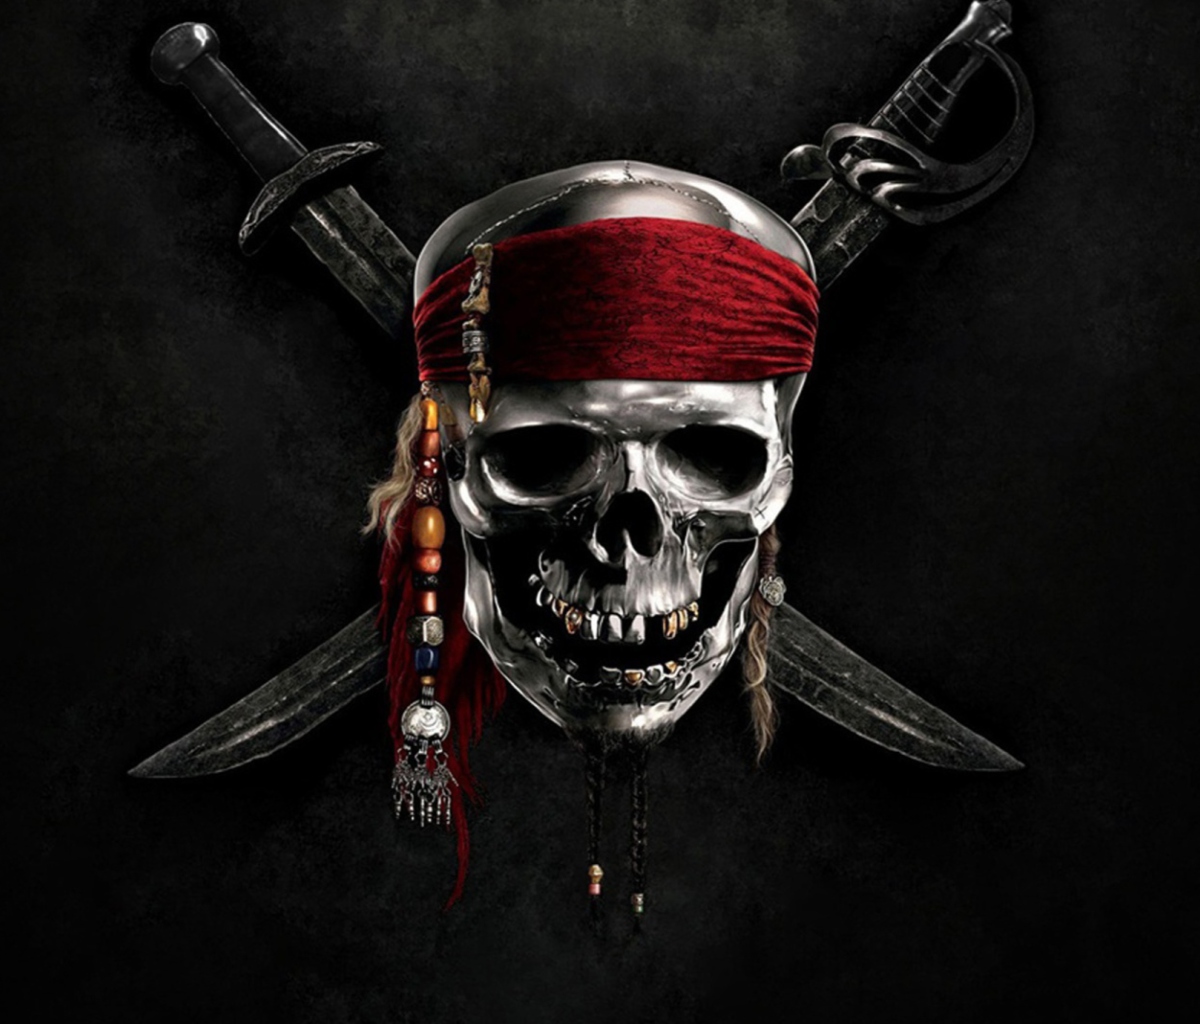 Pirates Of The Caribbean wallpaper 1200x1024